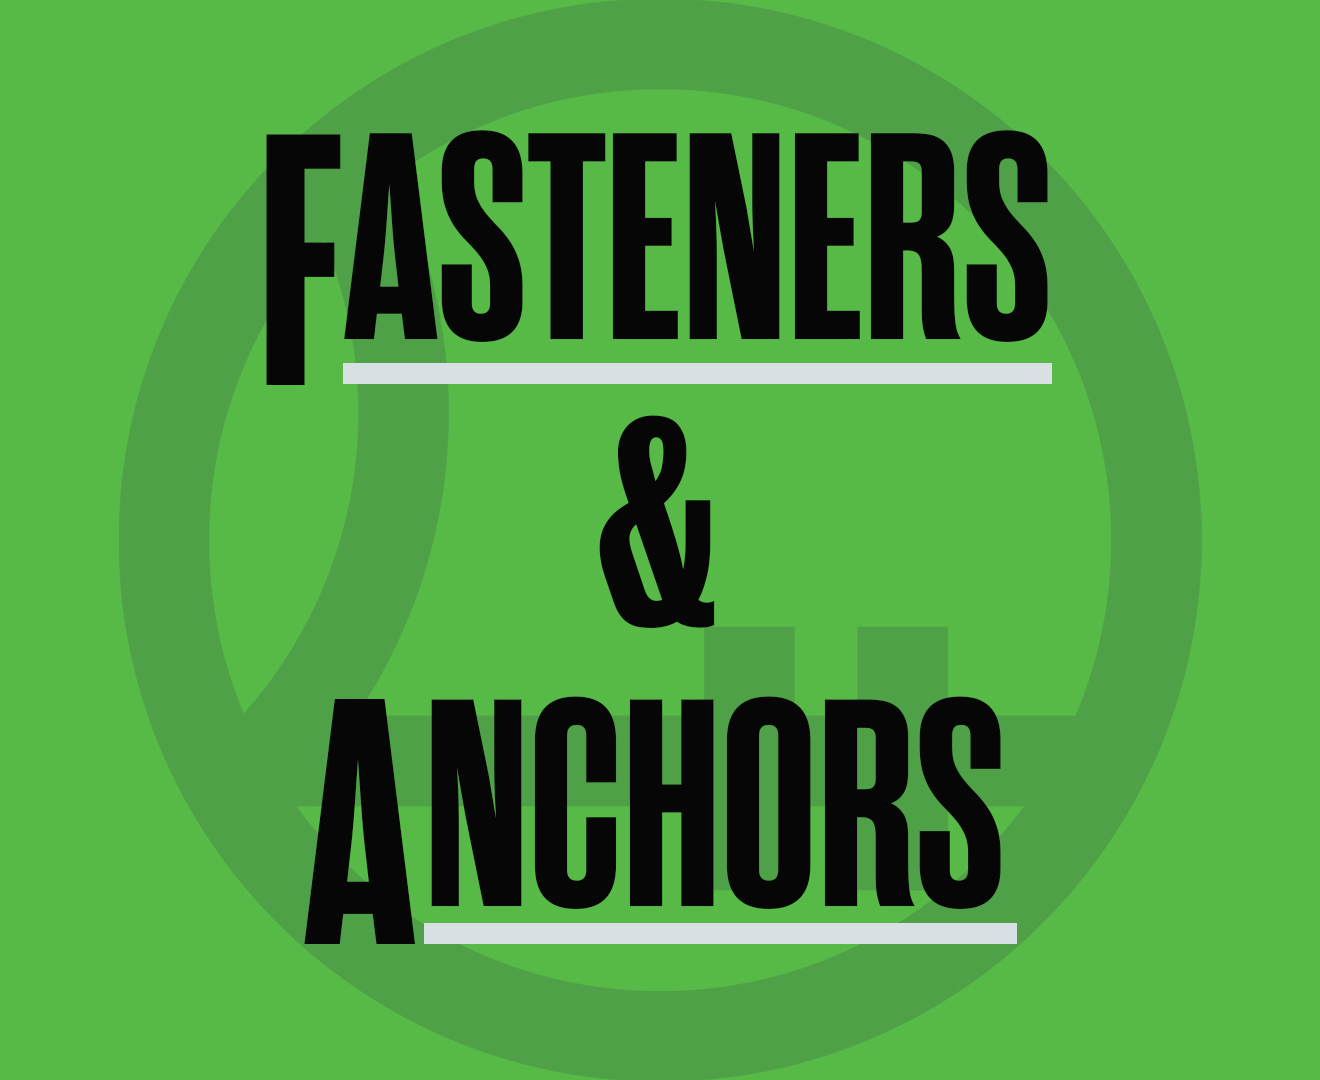 Fasteners & Anchors